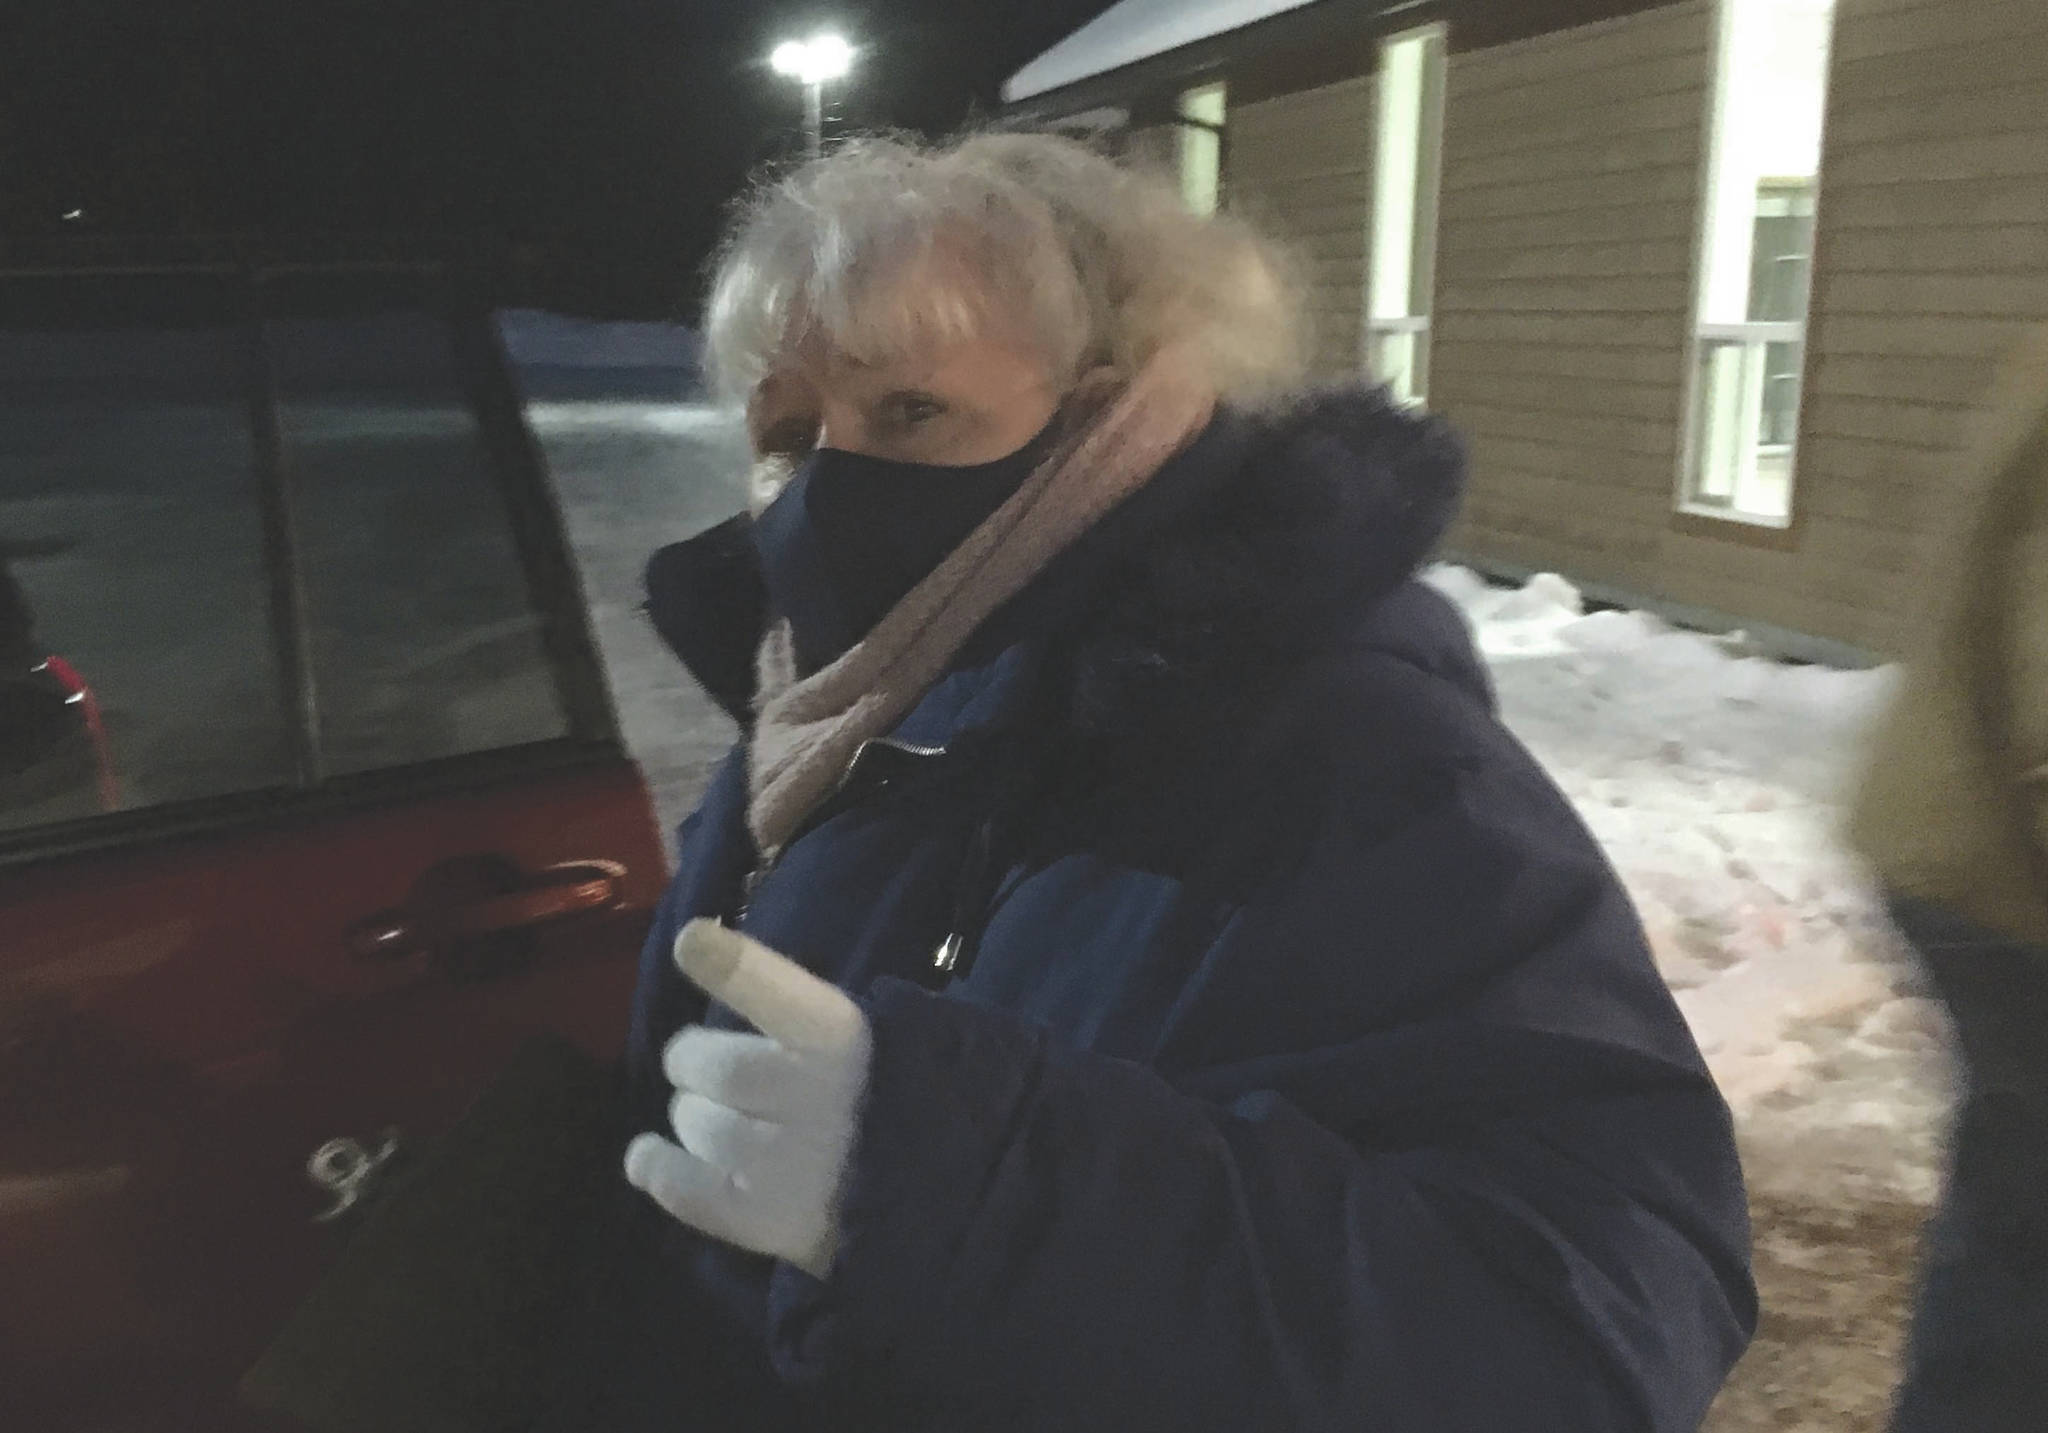 Kathy Carson helps distribute food bags from the Kenai Peninsula Food Bank on Tuesday, Dec. 22, 2020, at Christ Lutheran Church in Soldotna, Alaska. Carson is a volunteer with the church. (Photo by Jeff Helminiak/Peninsula Clarion)